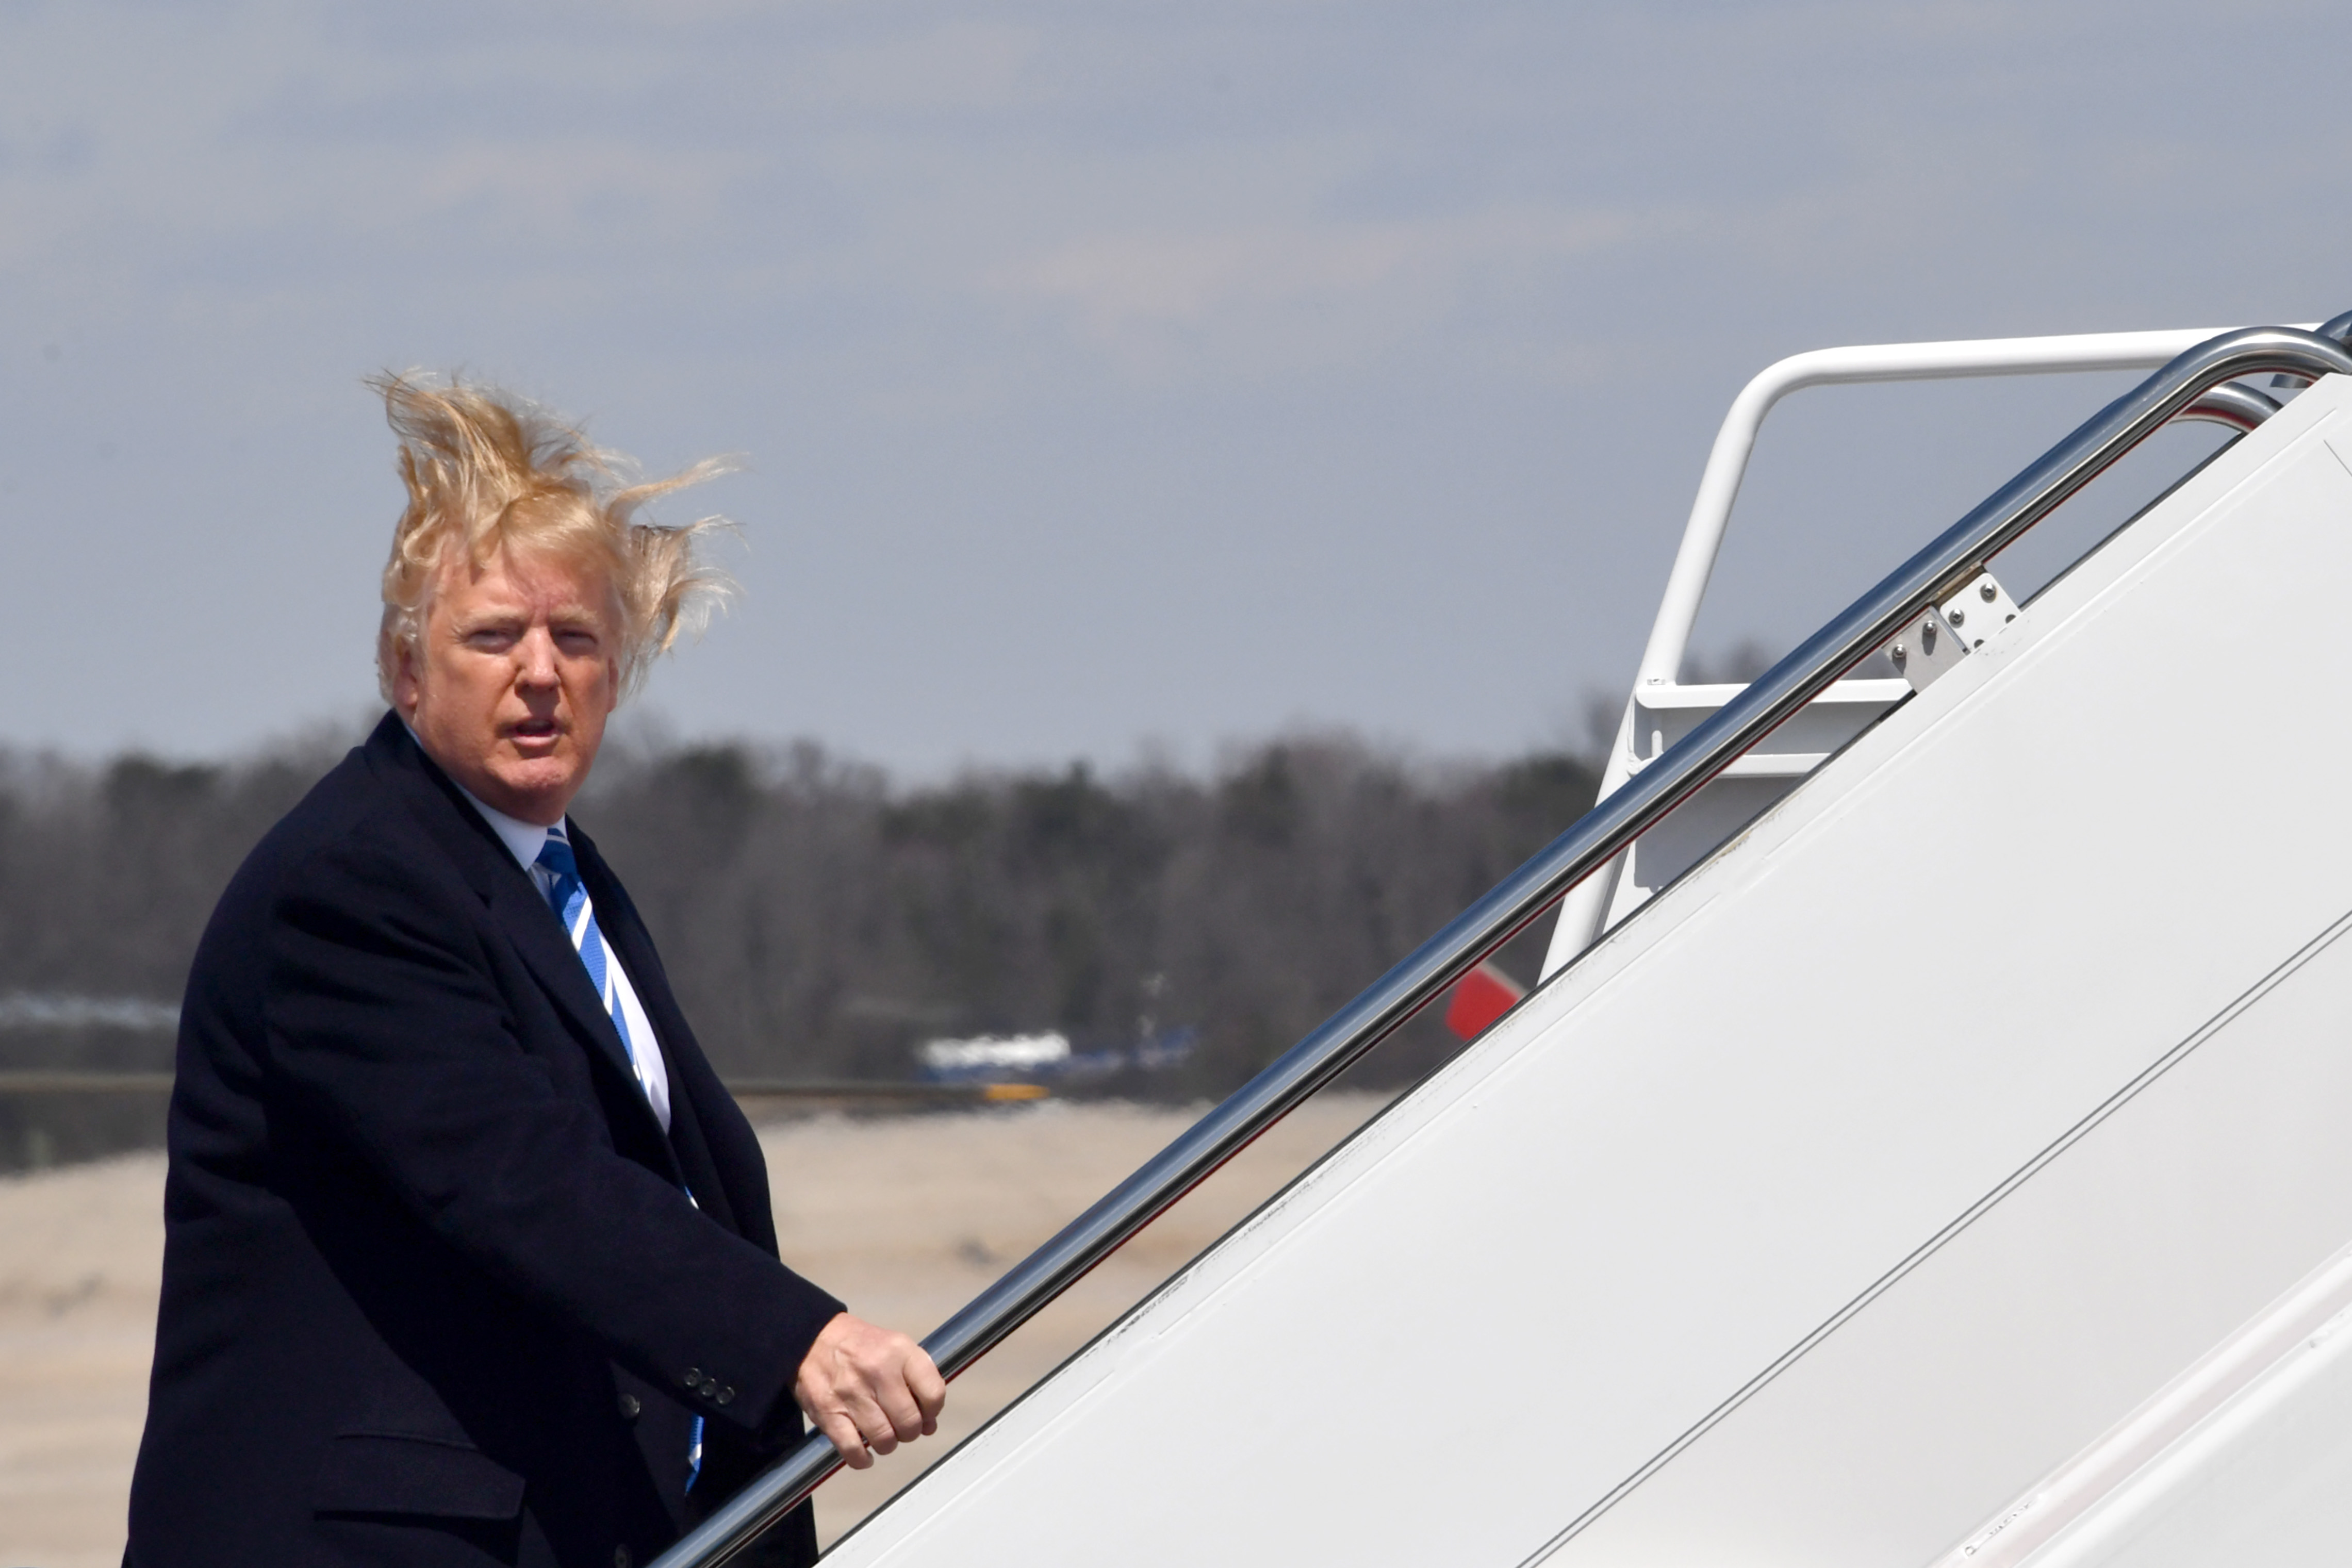 US President Donald Trump boards Air Force One on a windy day at Andrews Air Force base on April 5, 2018 near Washington, DC. Trump is heading to White Sulphur Springs, West Virginia for a round table discussion on tax reform. (NICHOLAS KAMM/AFP/Getty Images)